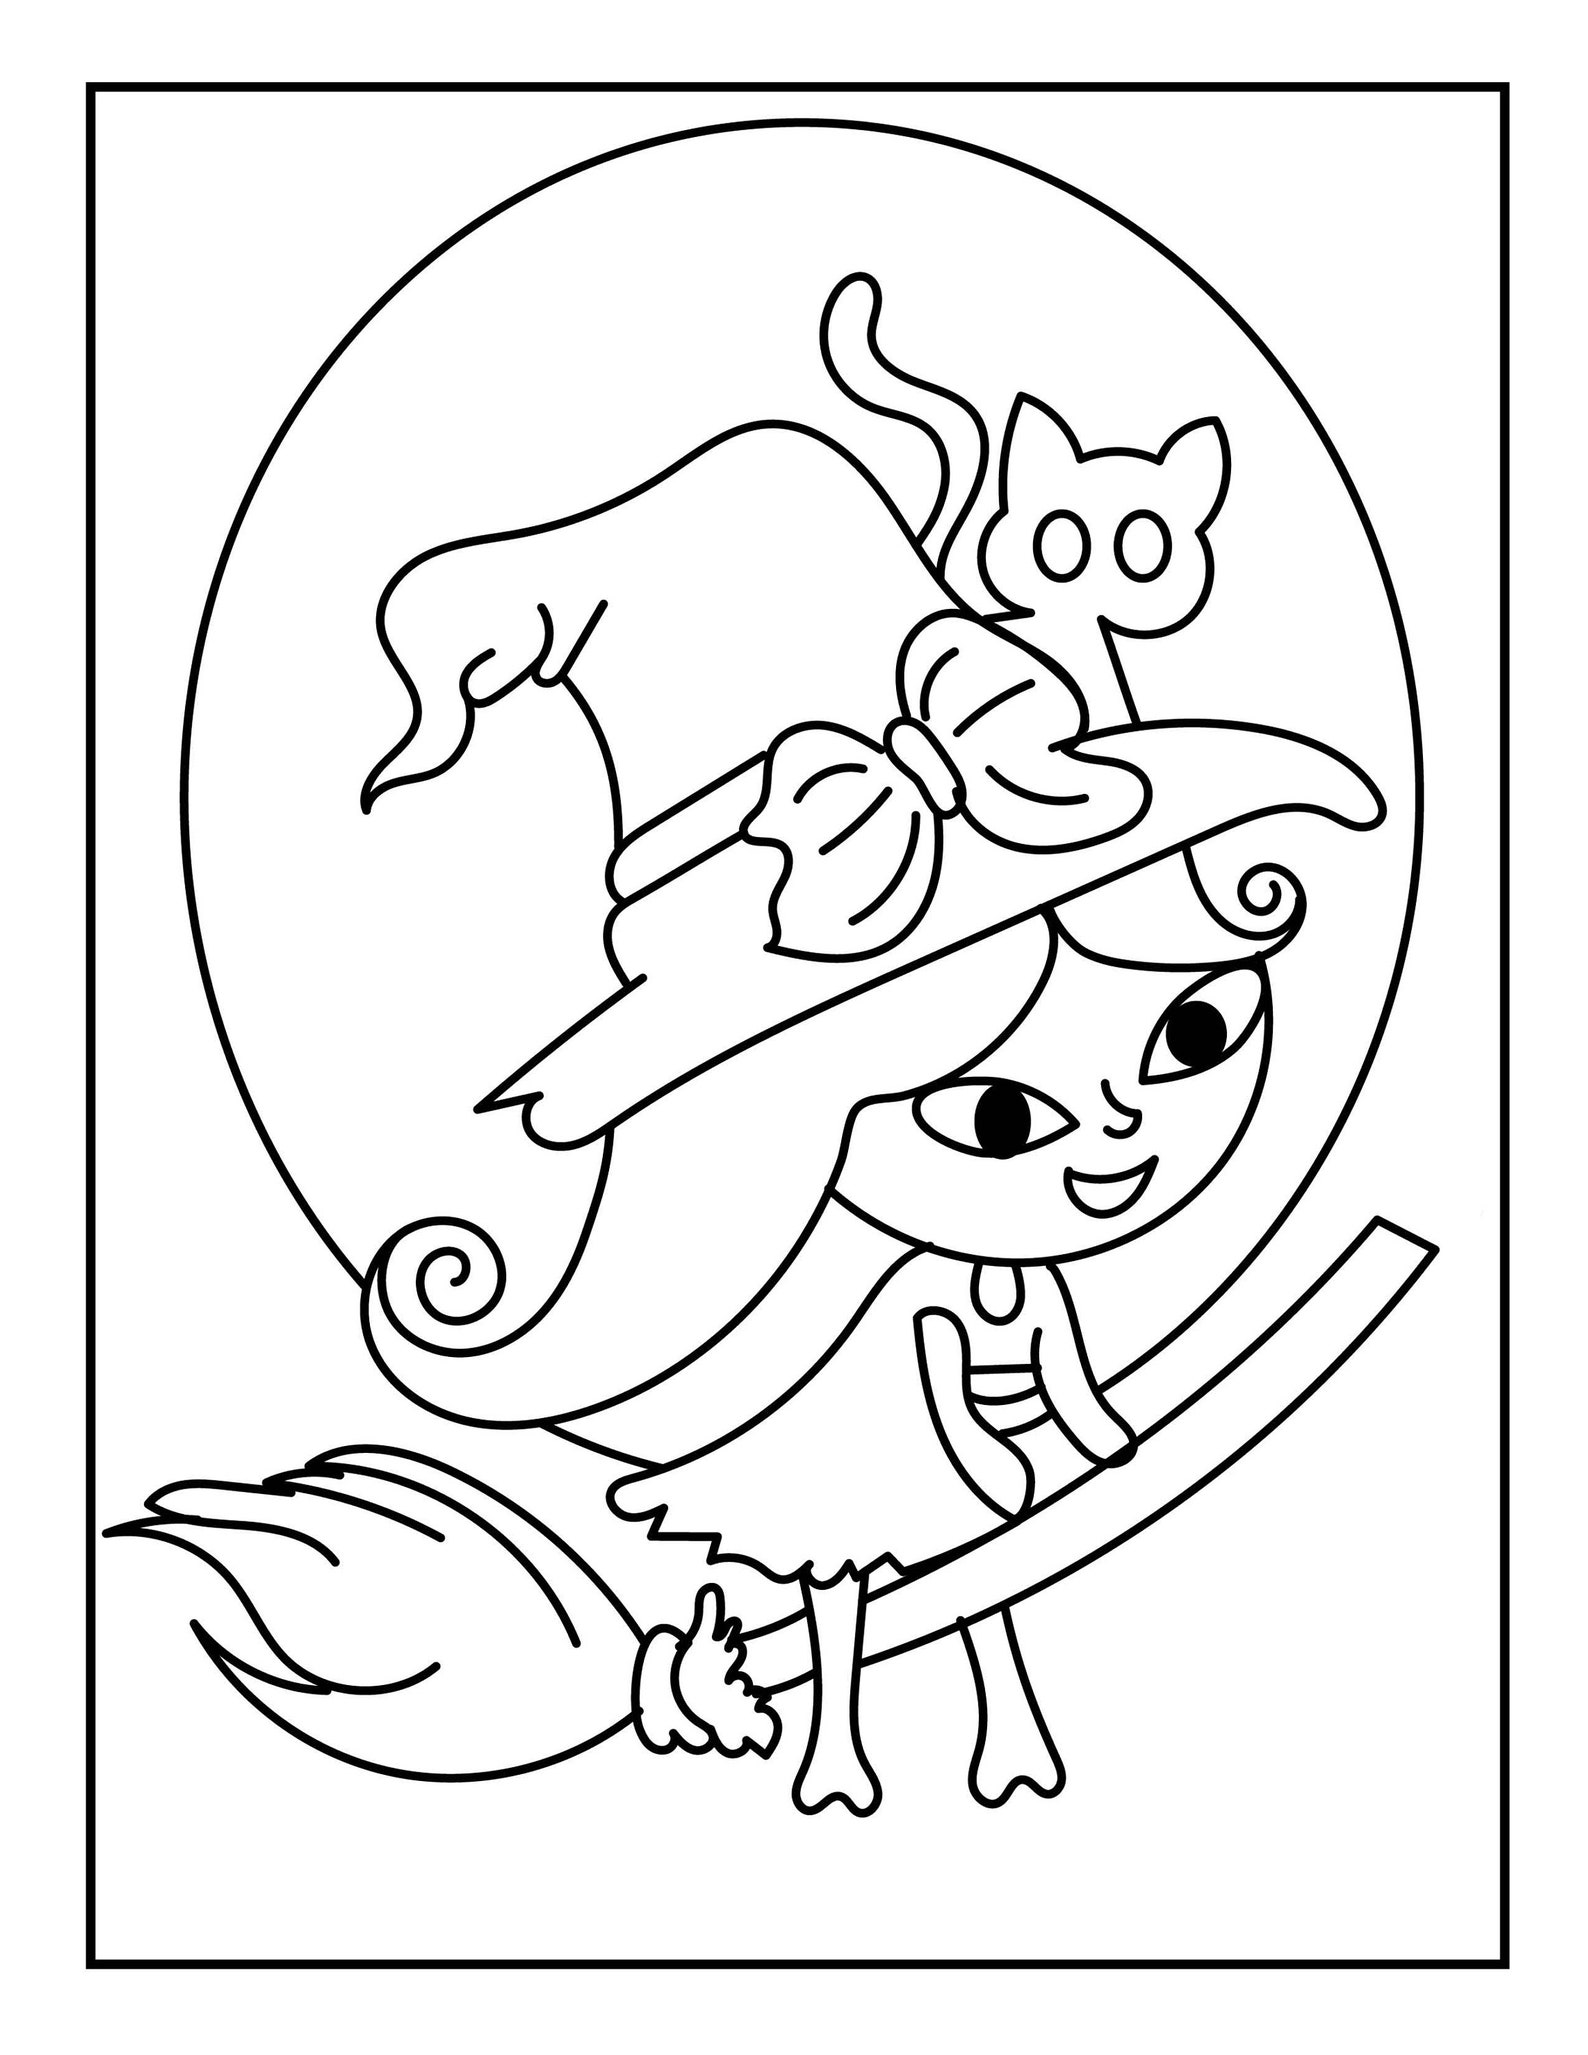 Halloween Coloring Pages for Kids Monster Mash - Etsy